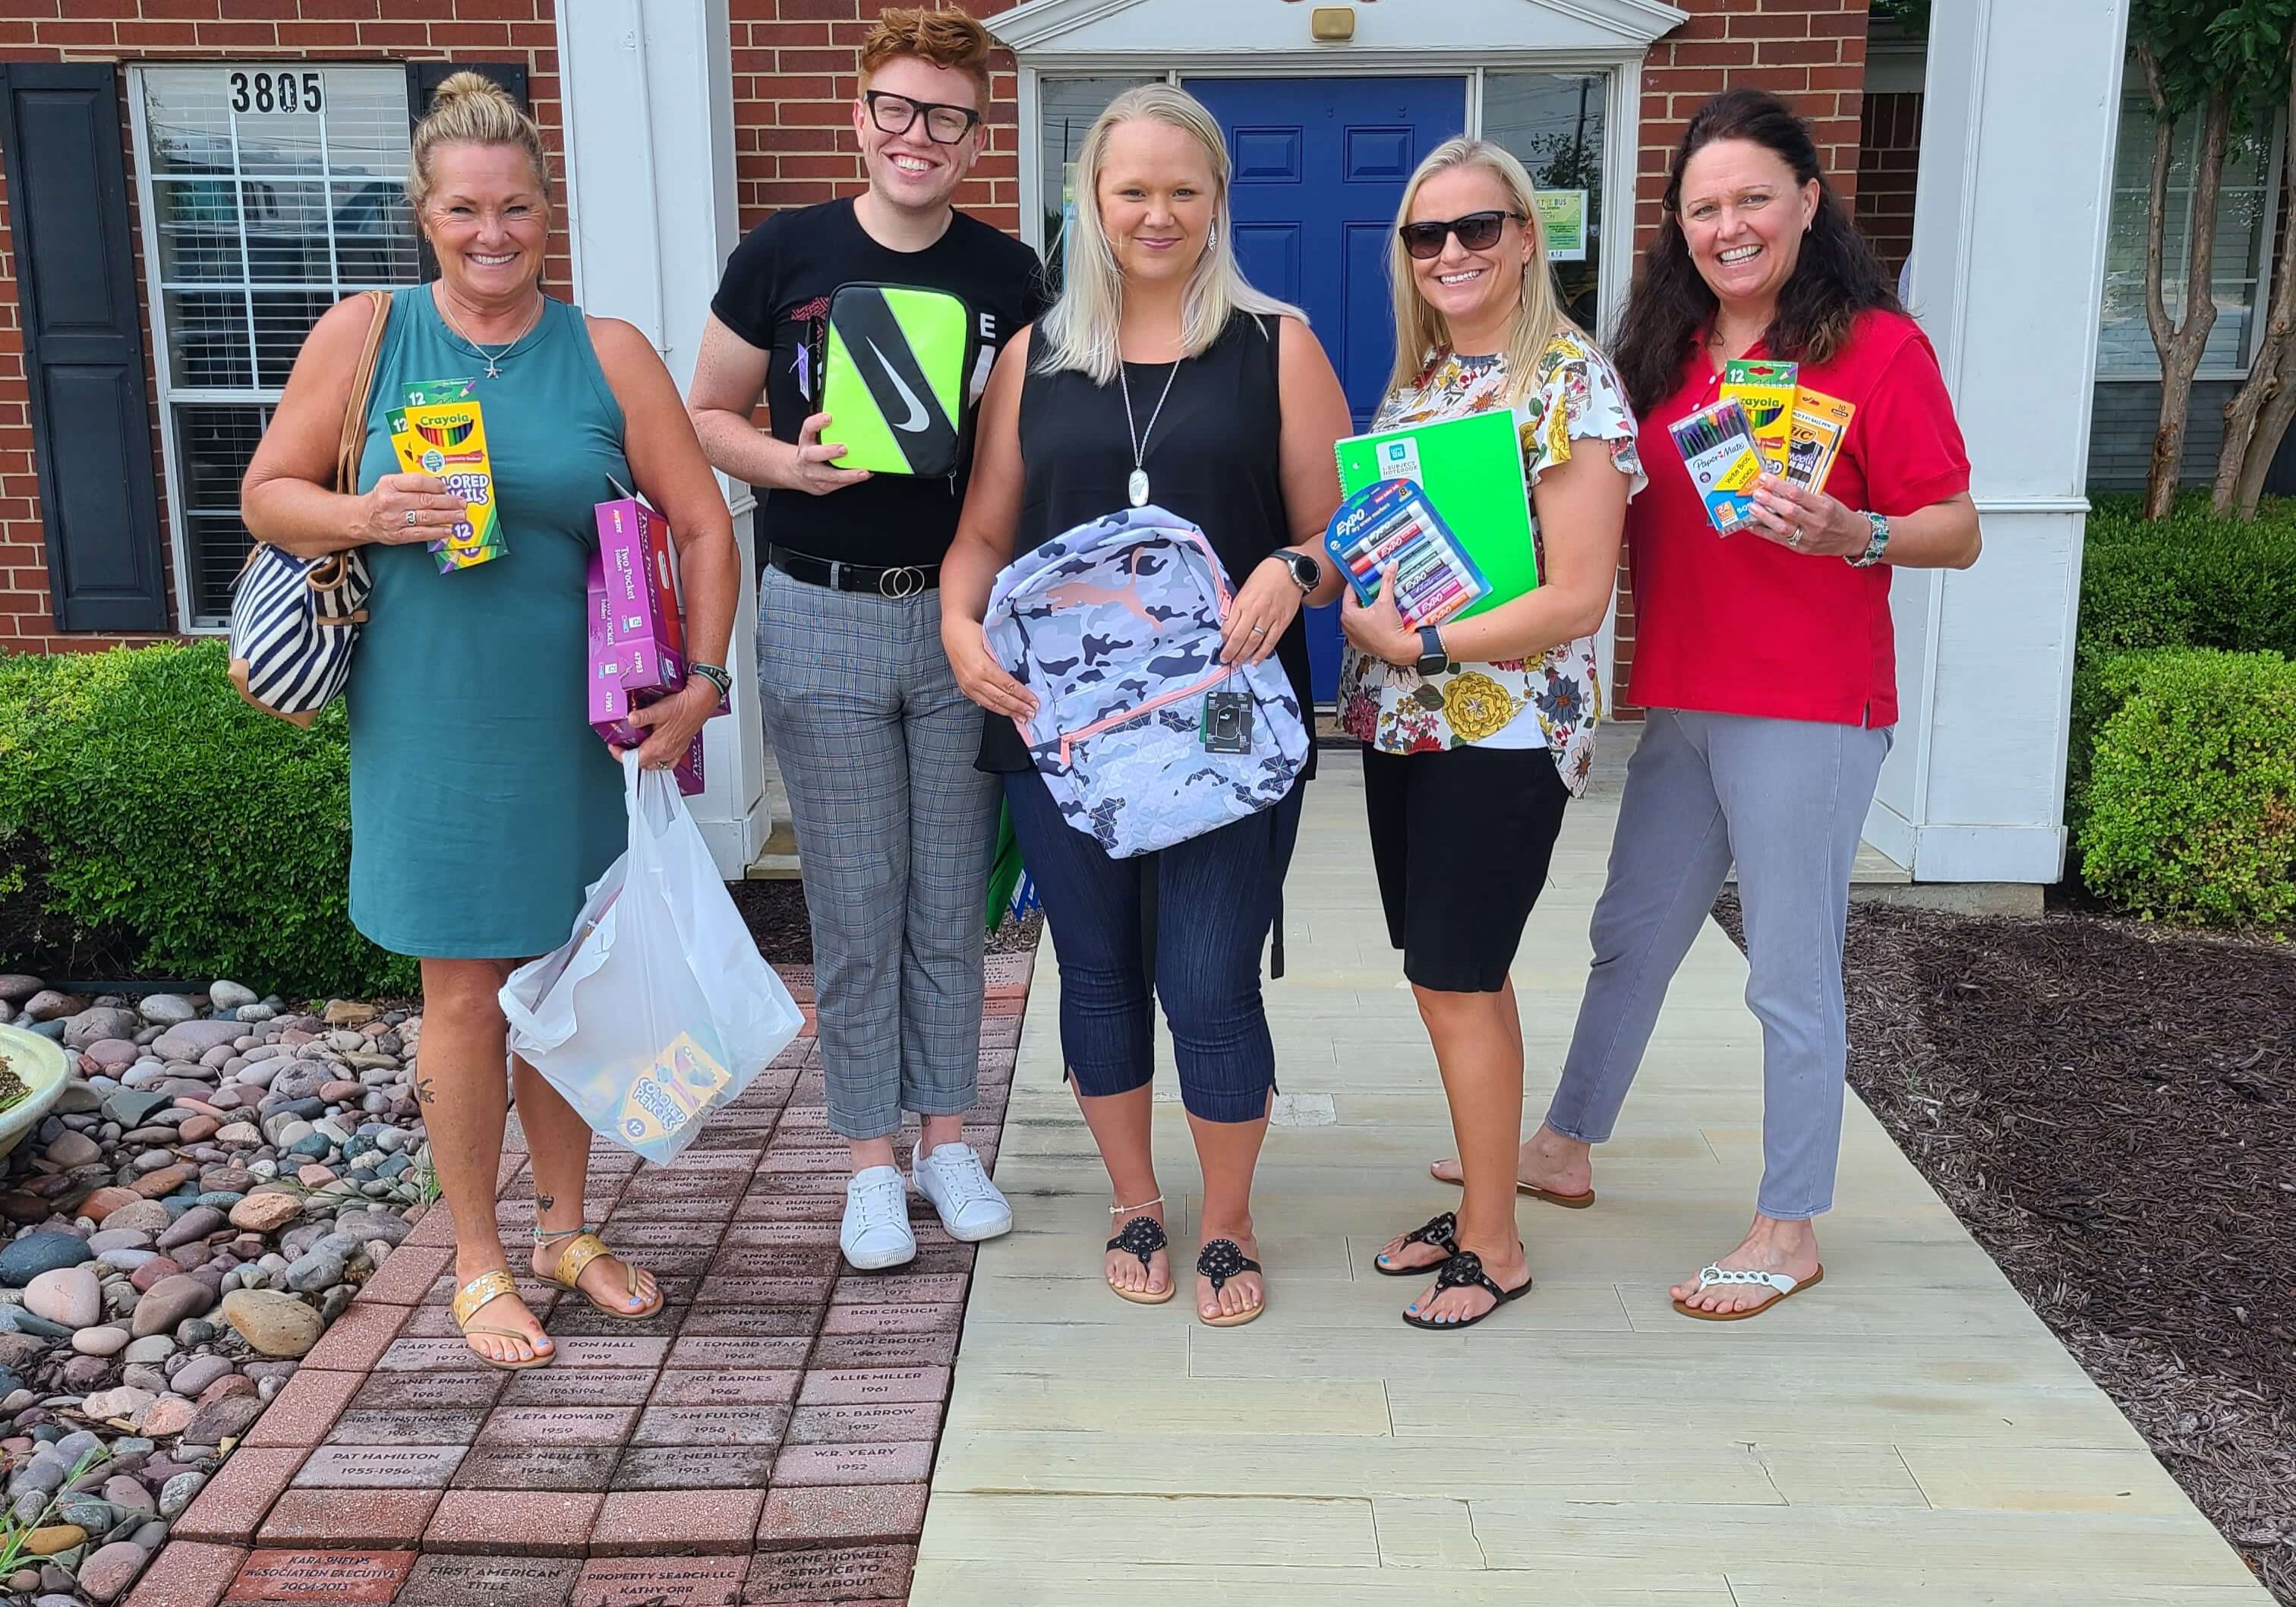 Some of our members in front of our office holding school supplies.